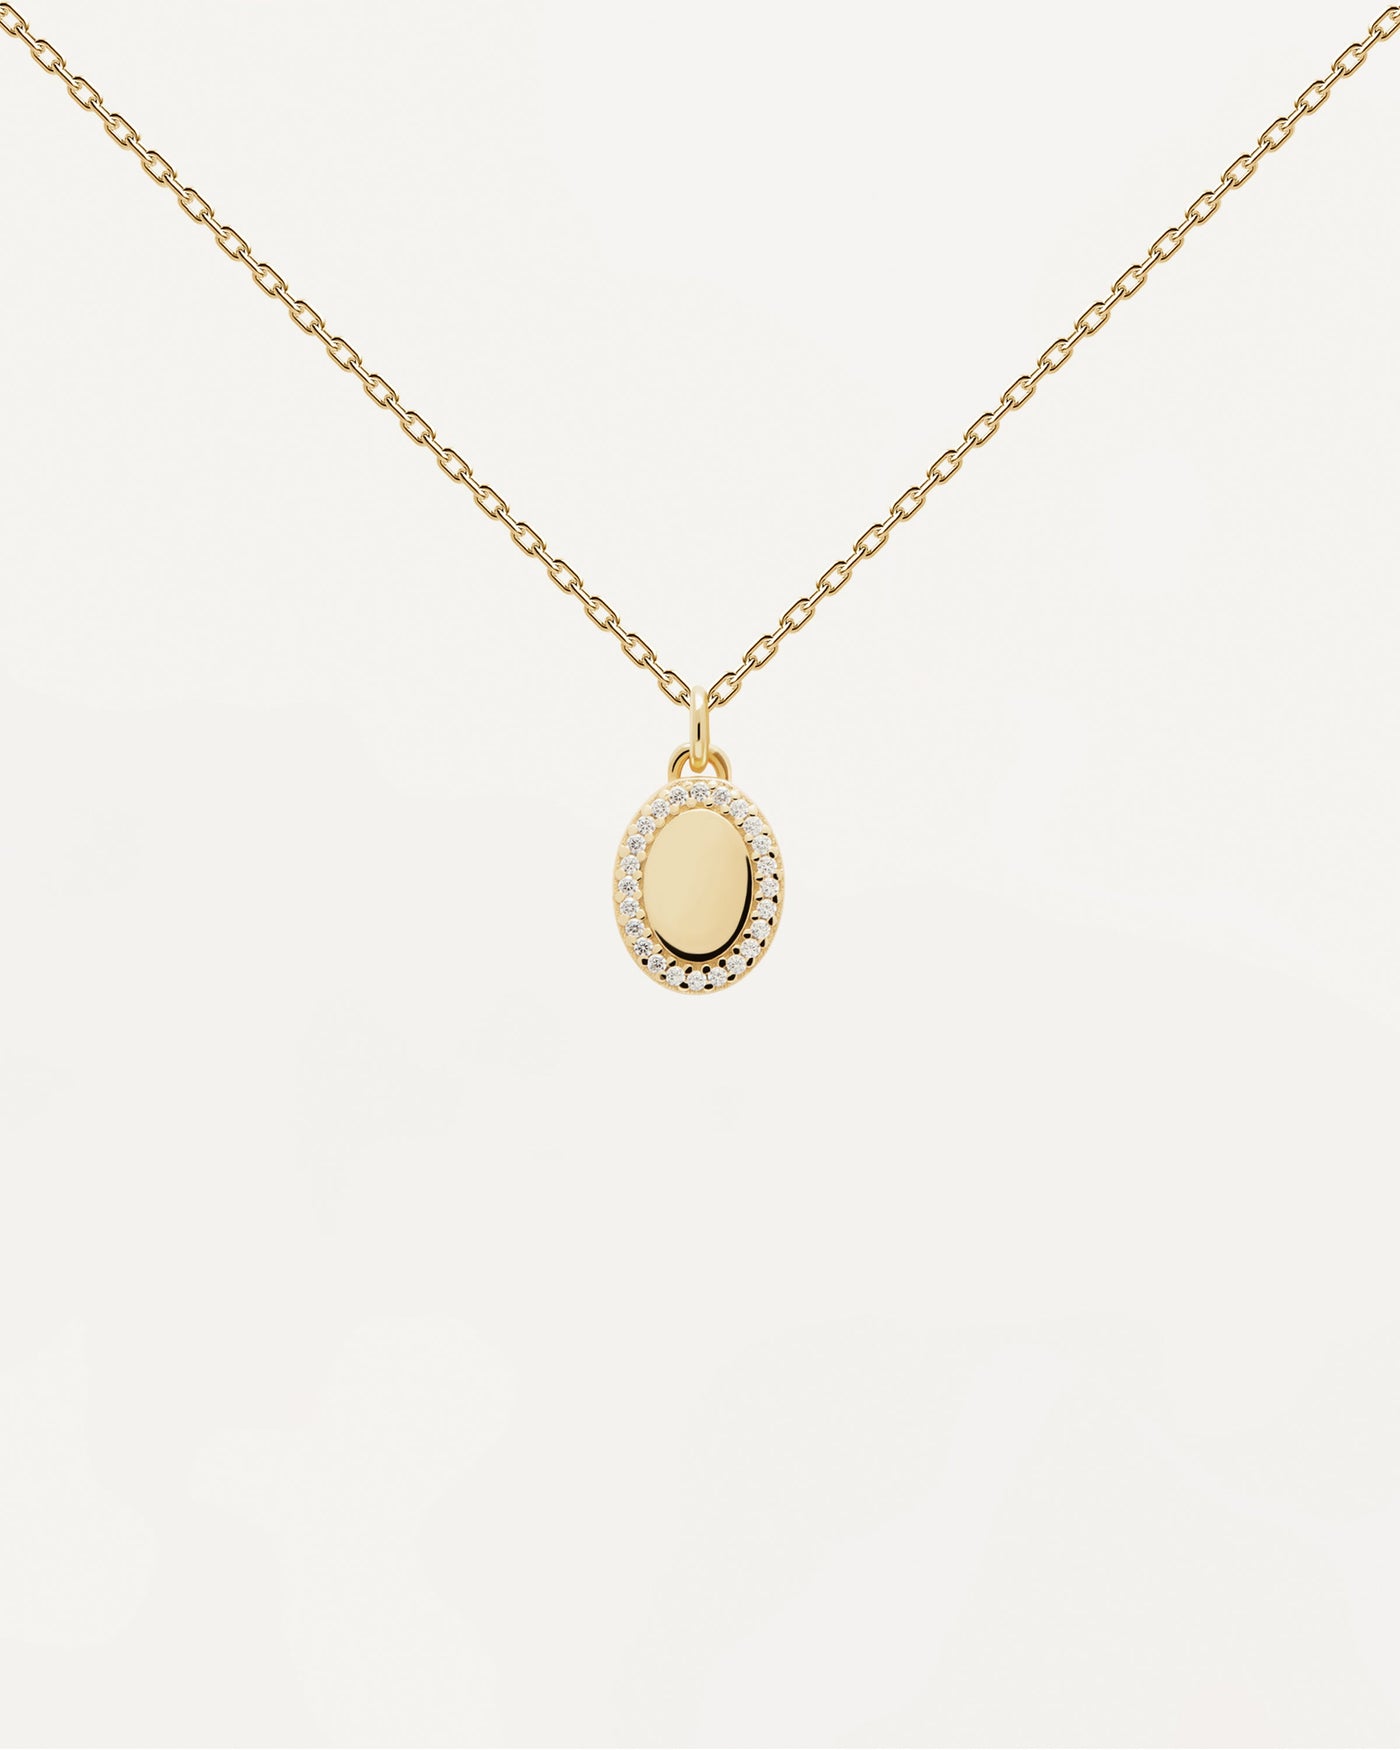 2023 Selection | Mademoiselle Necklace. Gold-plated silver necklace with pendant circled by white zirconia to personalize. Get the latest arrival from PDPAOLA. Place your order safely and get this Best Seller. Free Shipping.